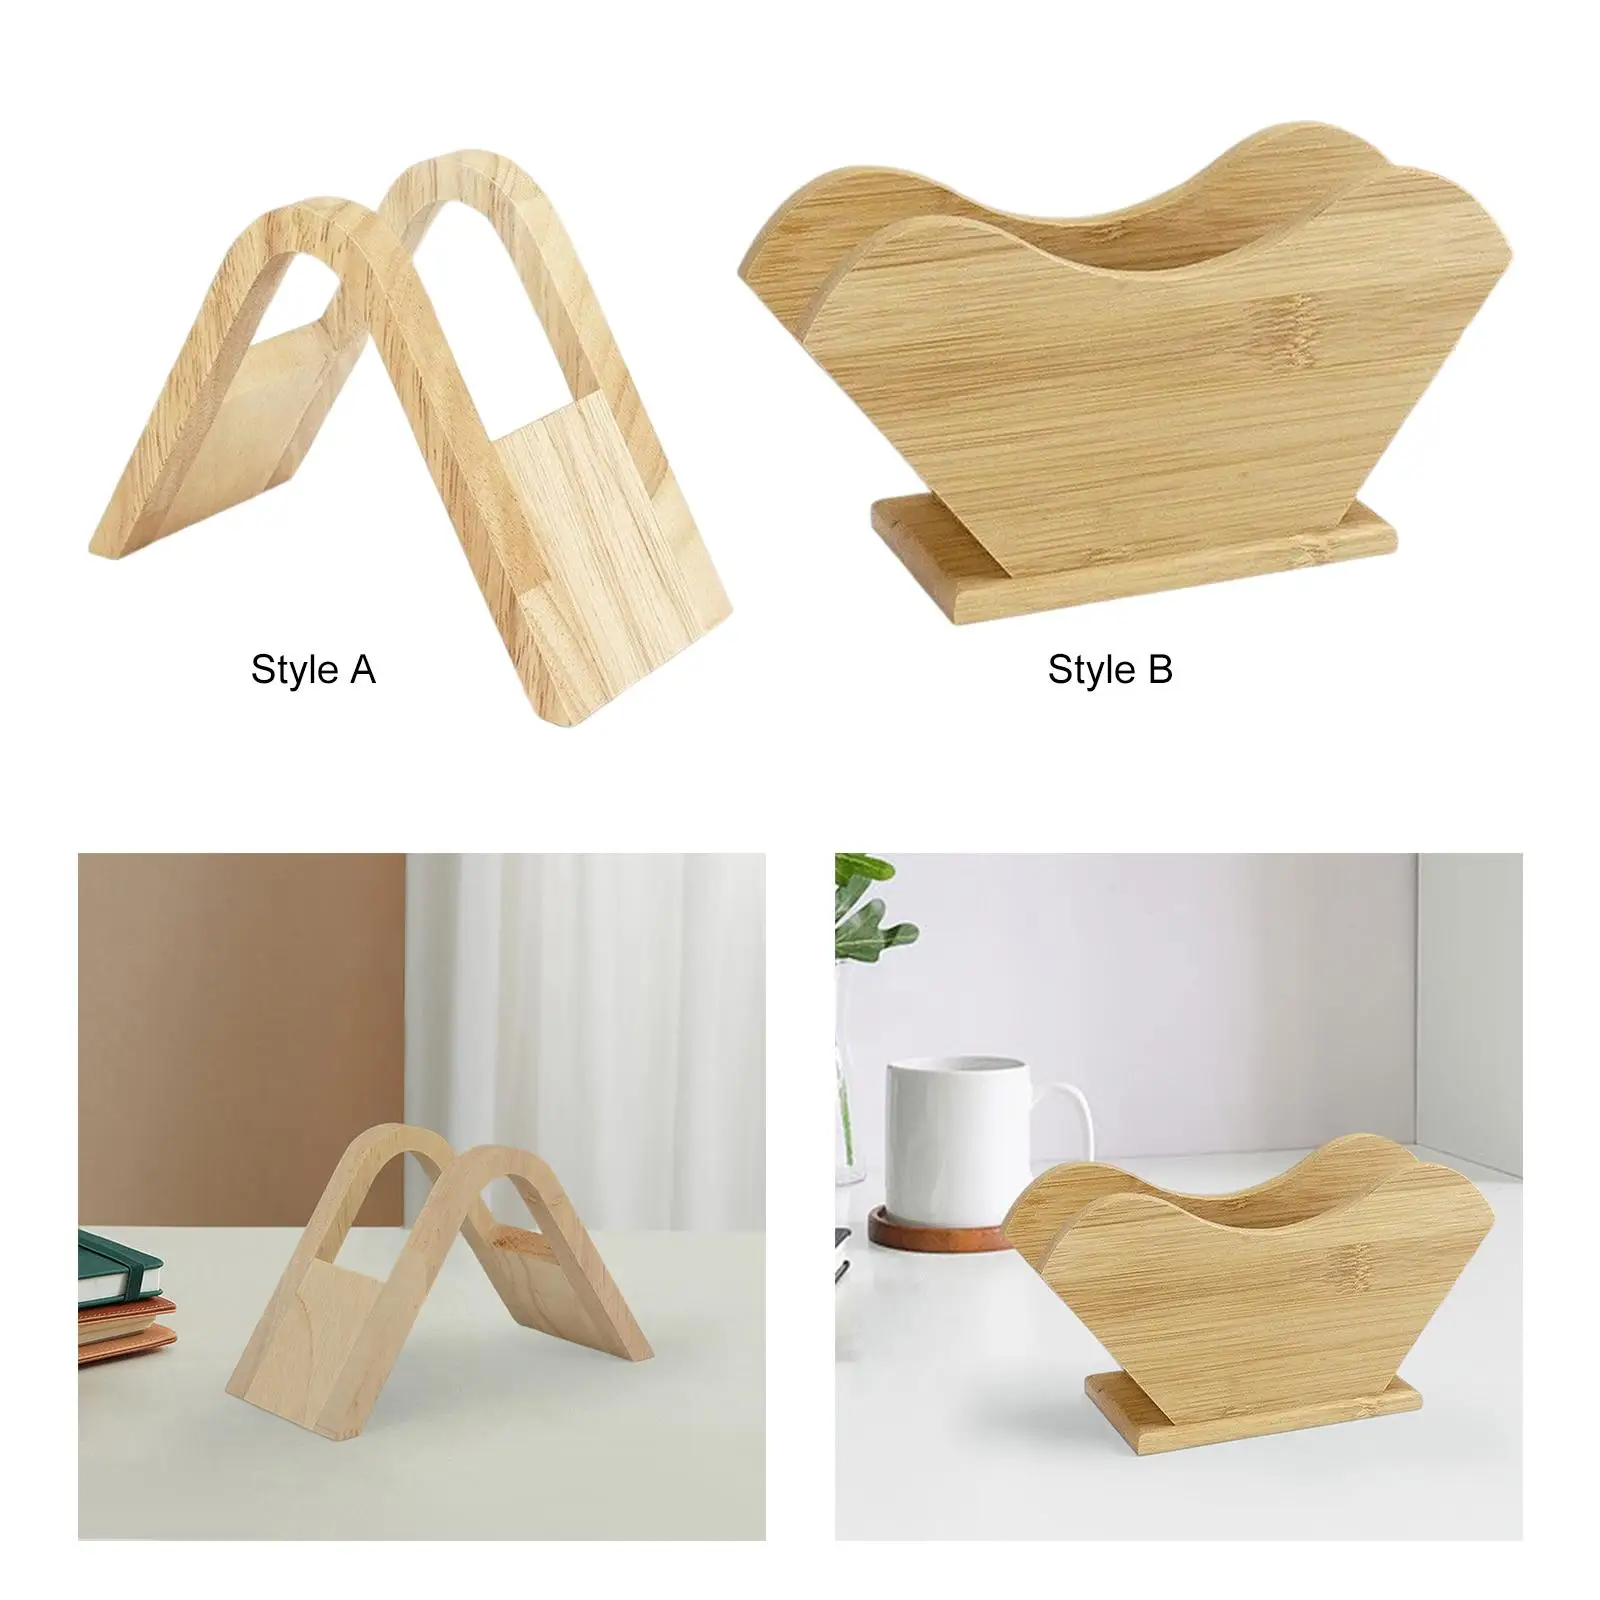 V Shape Coffee Filter Holder Standing Coffee Utensil Stand Storage Rack Wood for Countertop Kitchen